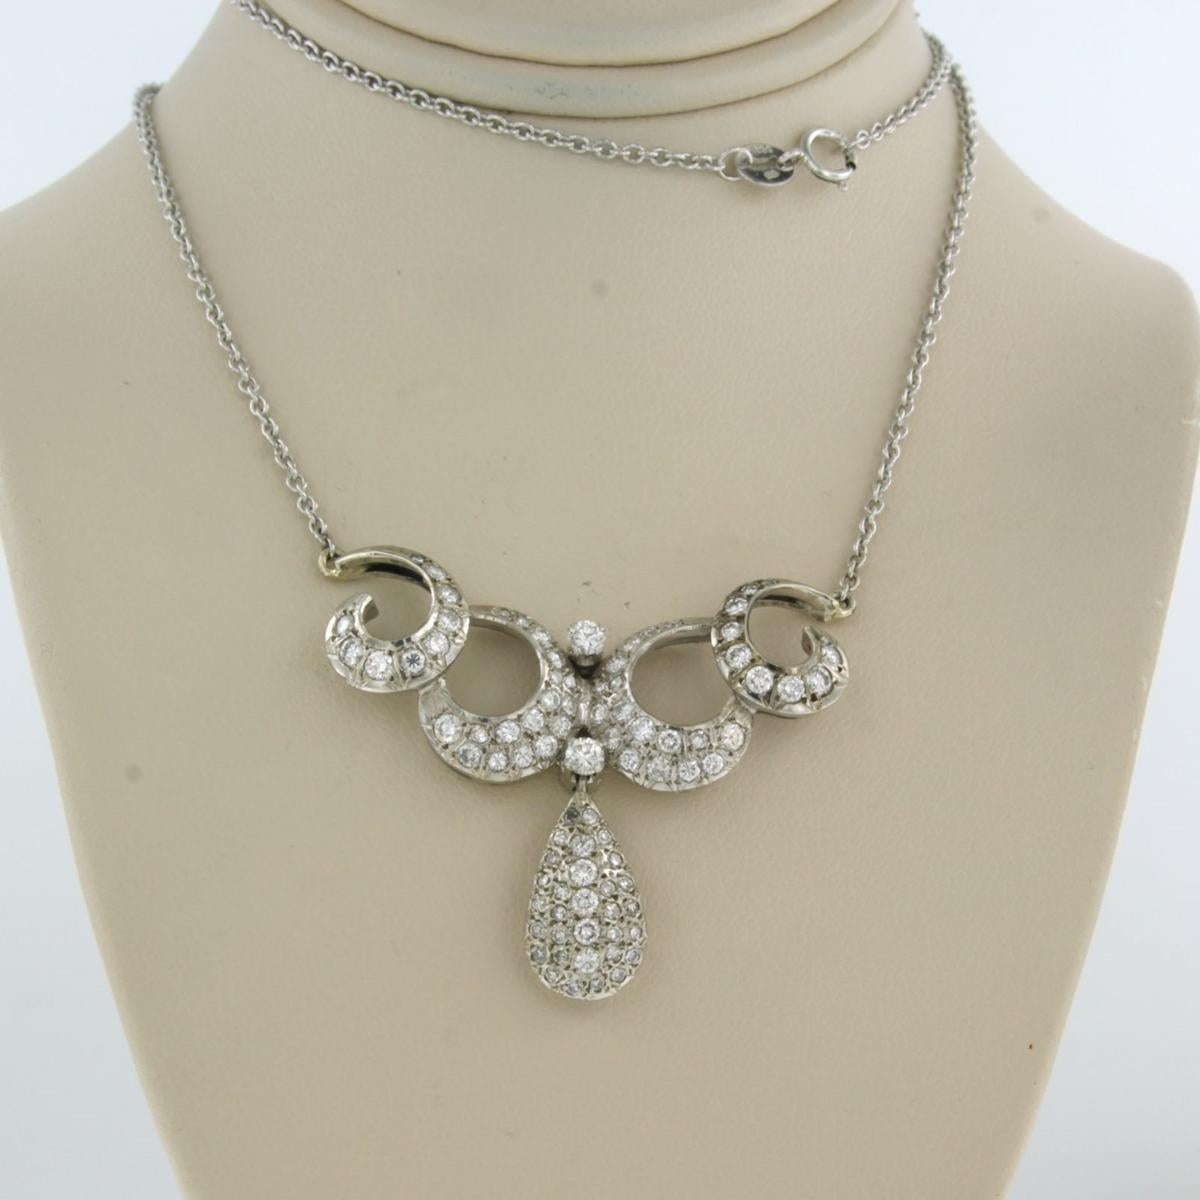 Platinum necklace with 18k white gold center piece set with brilliant and single cut diamonds up to. 1.75ct - F/G - VS/SI - 45 cm long

detailed description:

necklace is 45 cm long and 1.2 mm wide

The size of the center piece is approximately 4.0